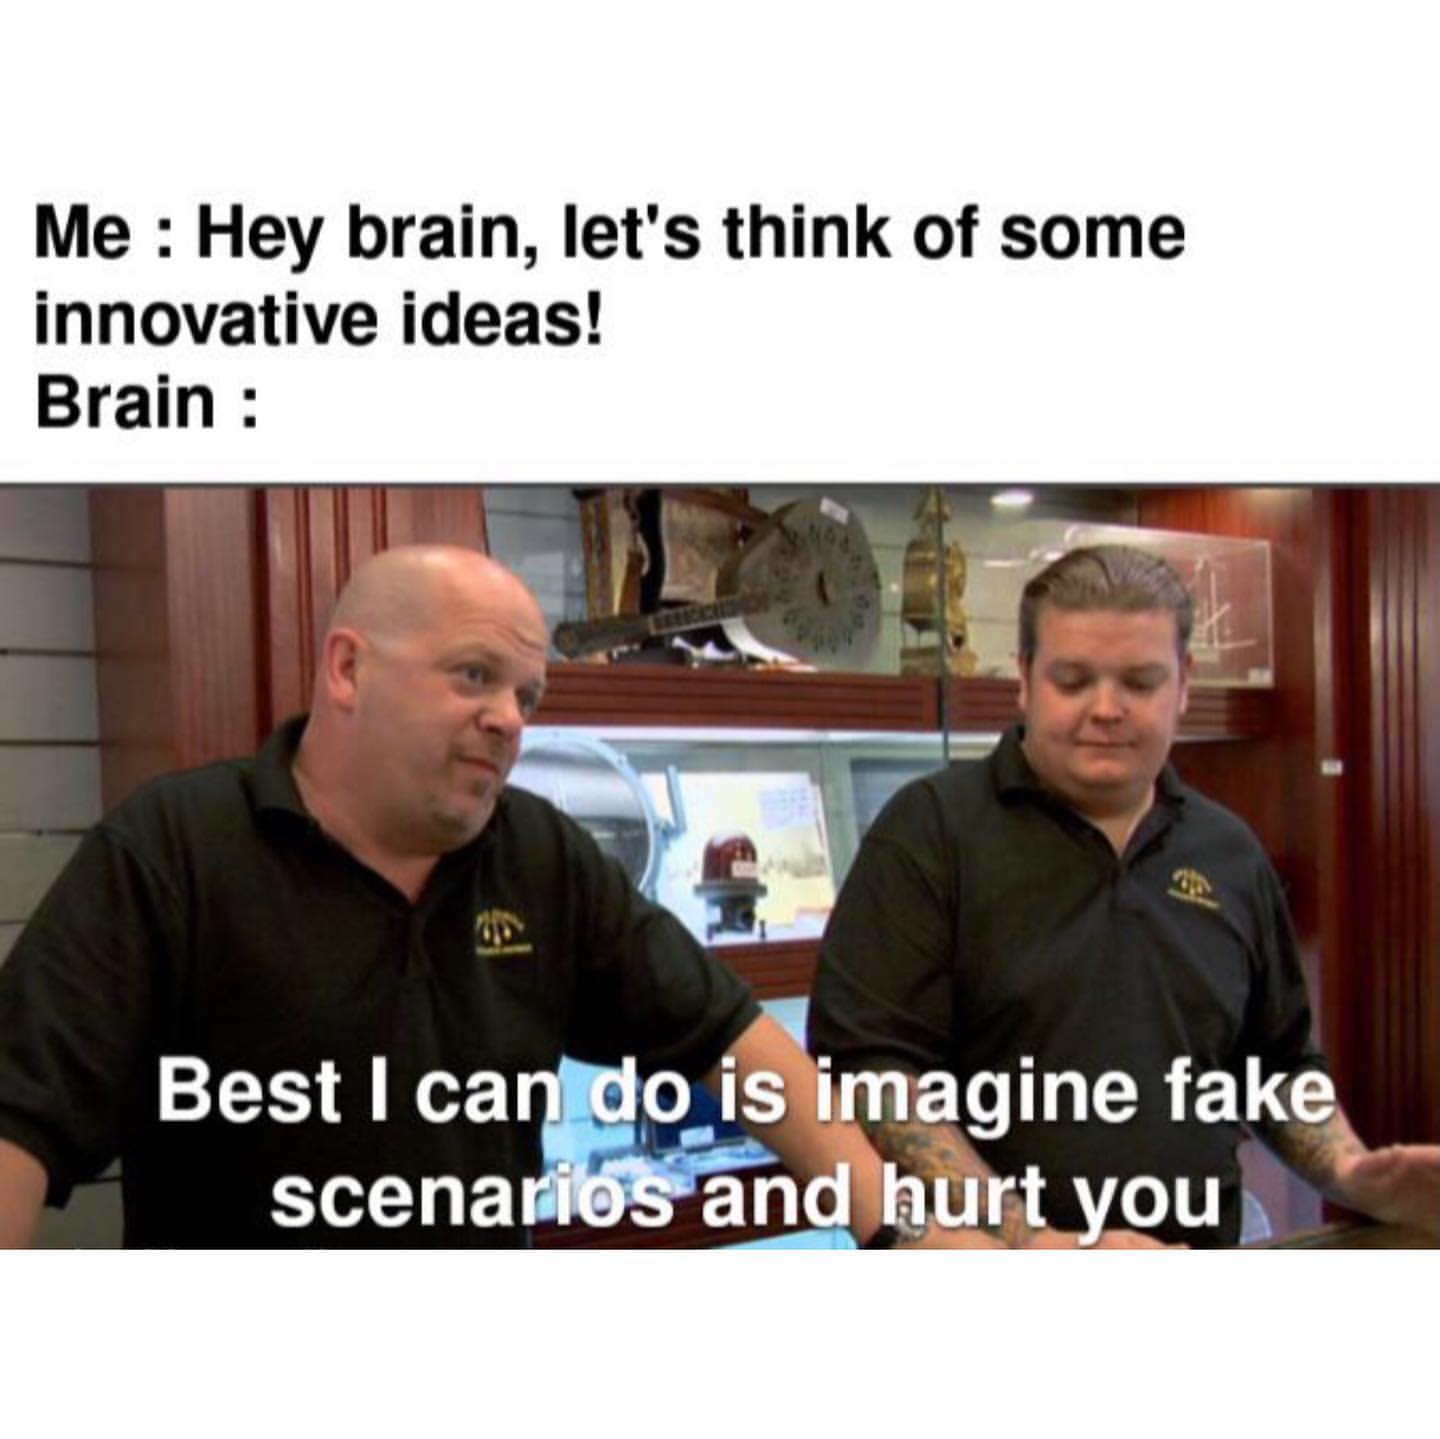 Me: Hey brain, let's think of some innovative ideas! Brain: Best I can do is imagine fake scenarios and hurt you.